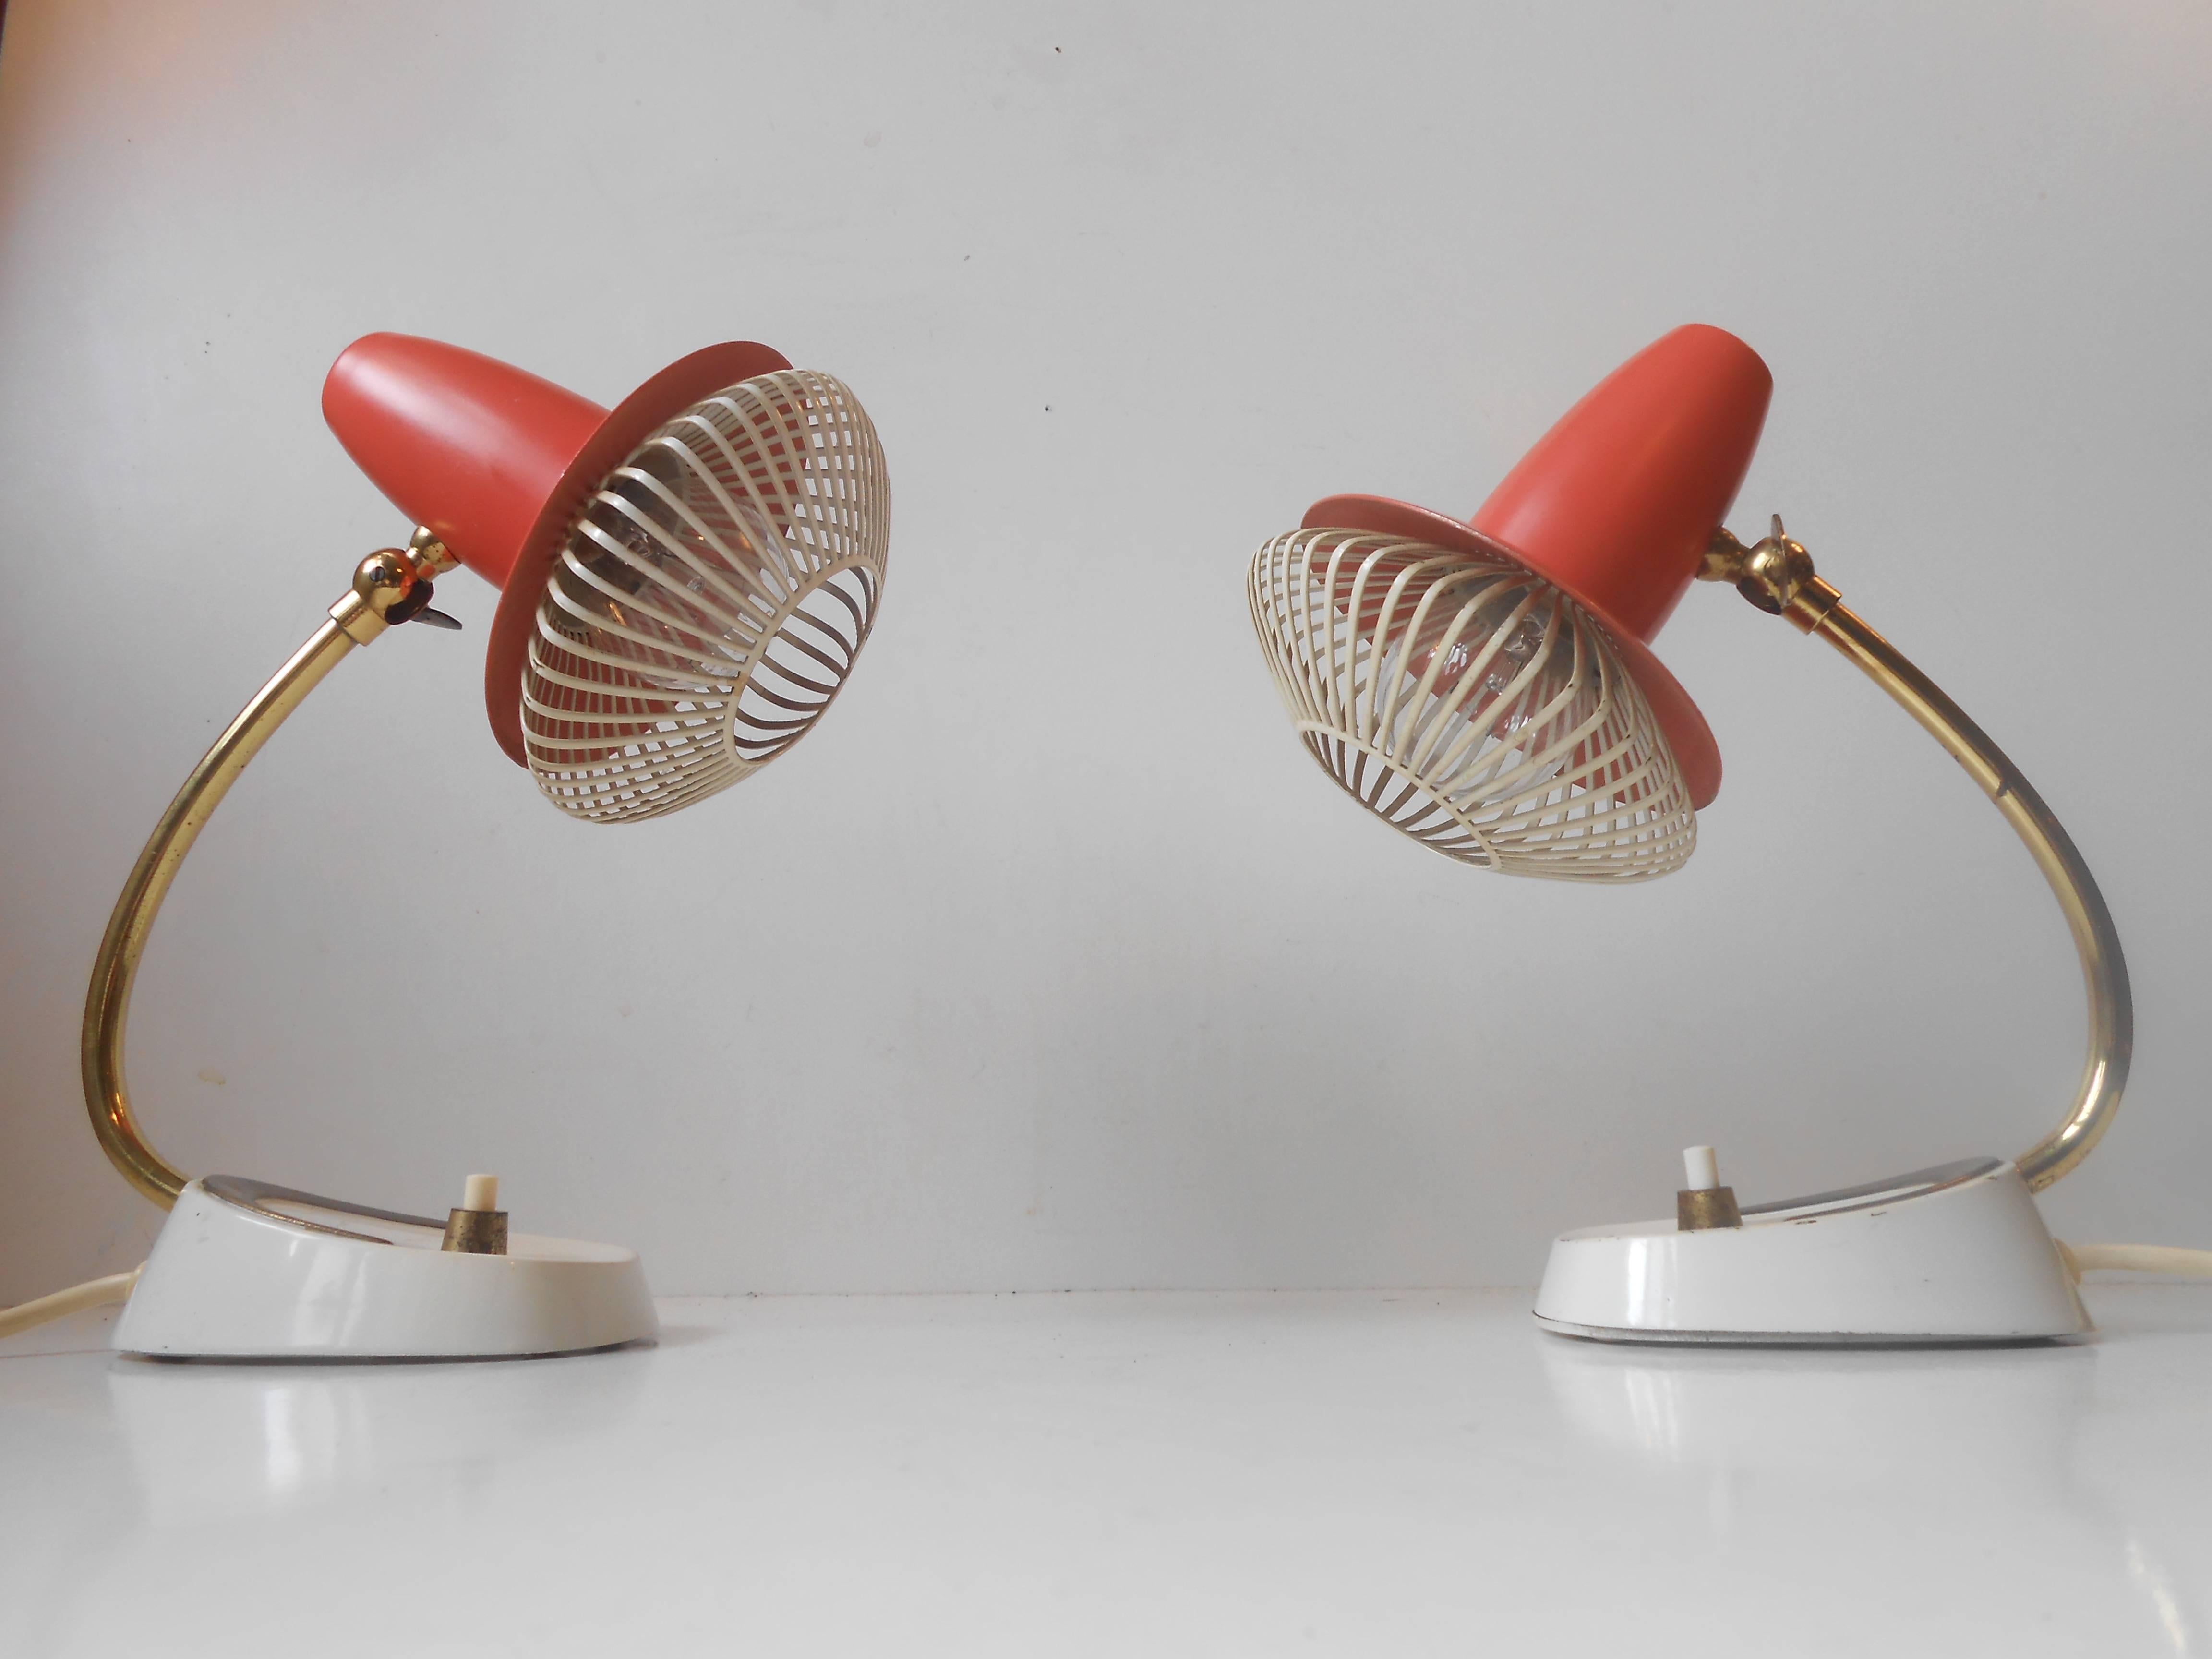 Brass Pair of Adjustable Red Table Lamps, Stilnovo Style, Possibly Swiss, ca. 1958-60